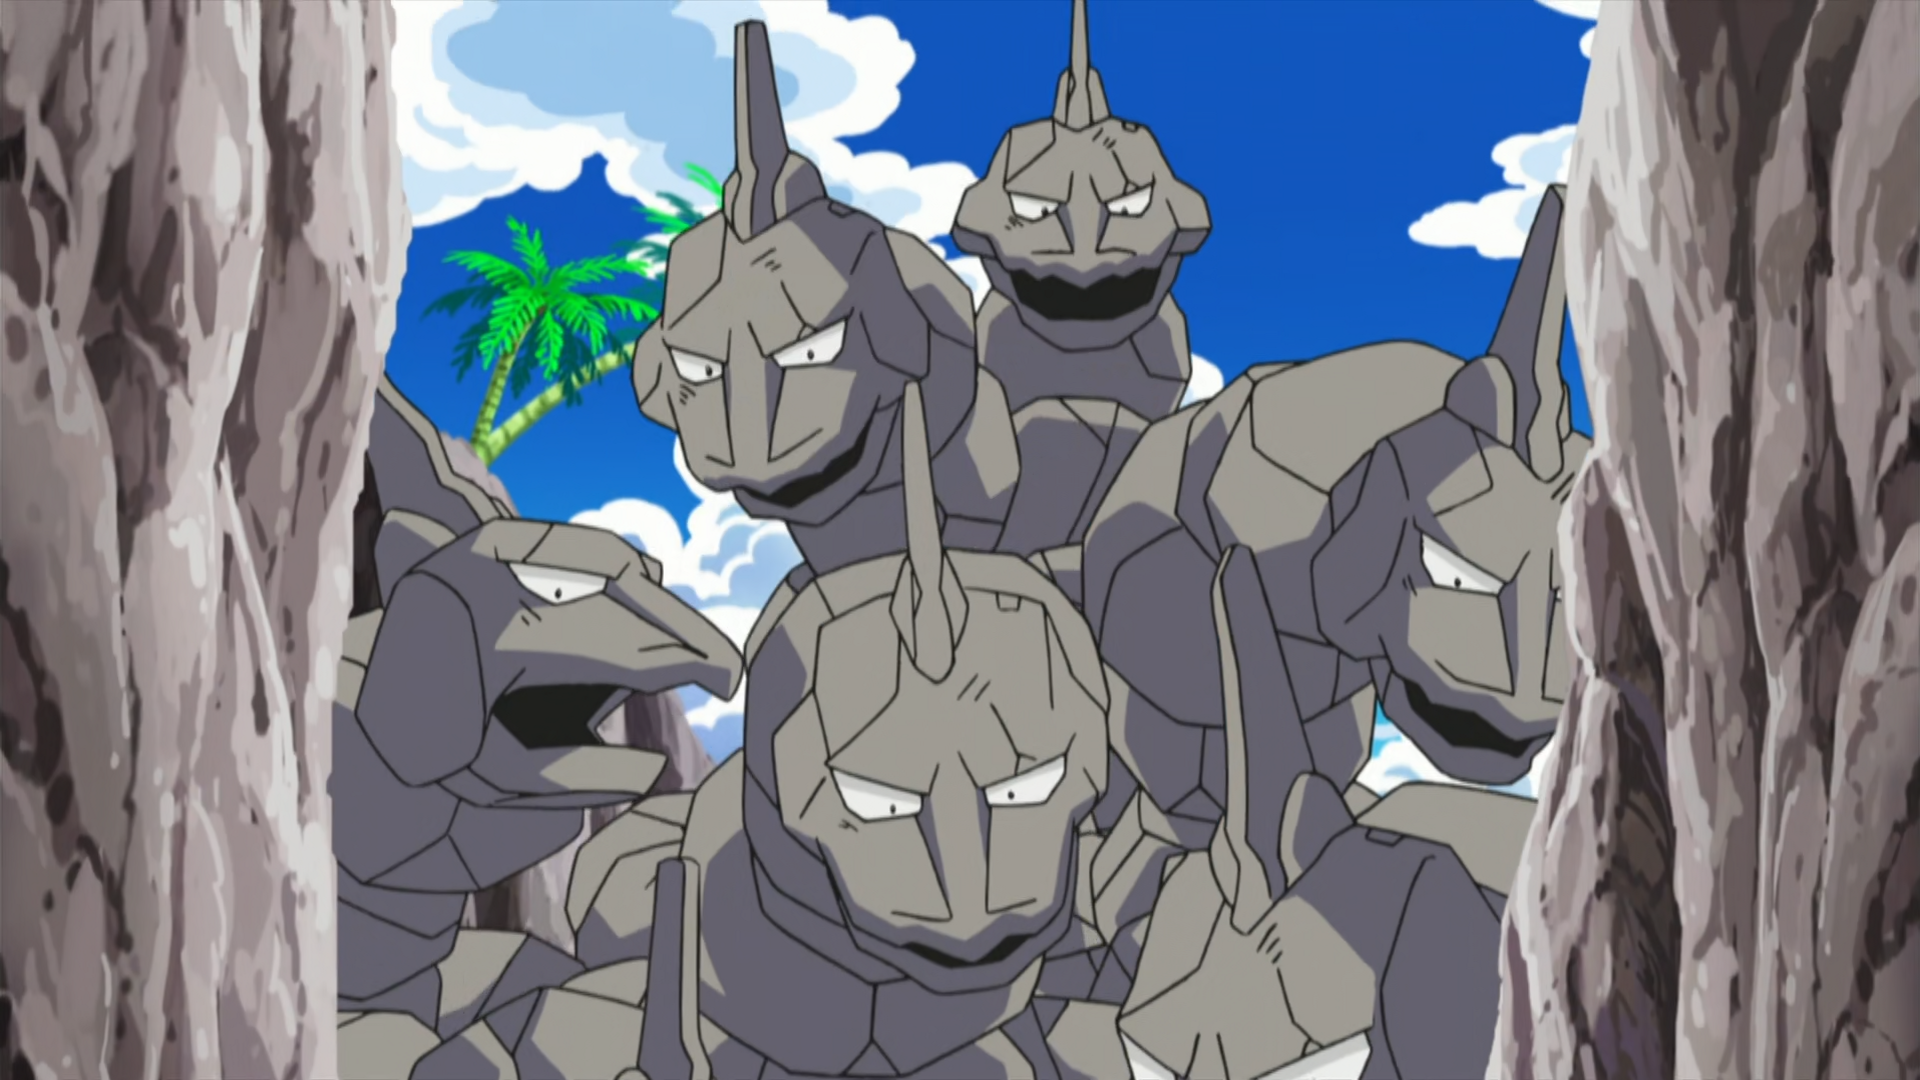 How To Use Onix The Pokemon As A D&D Monster